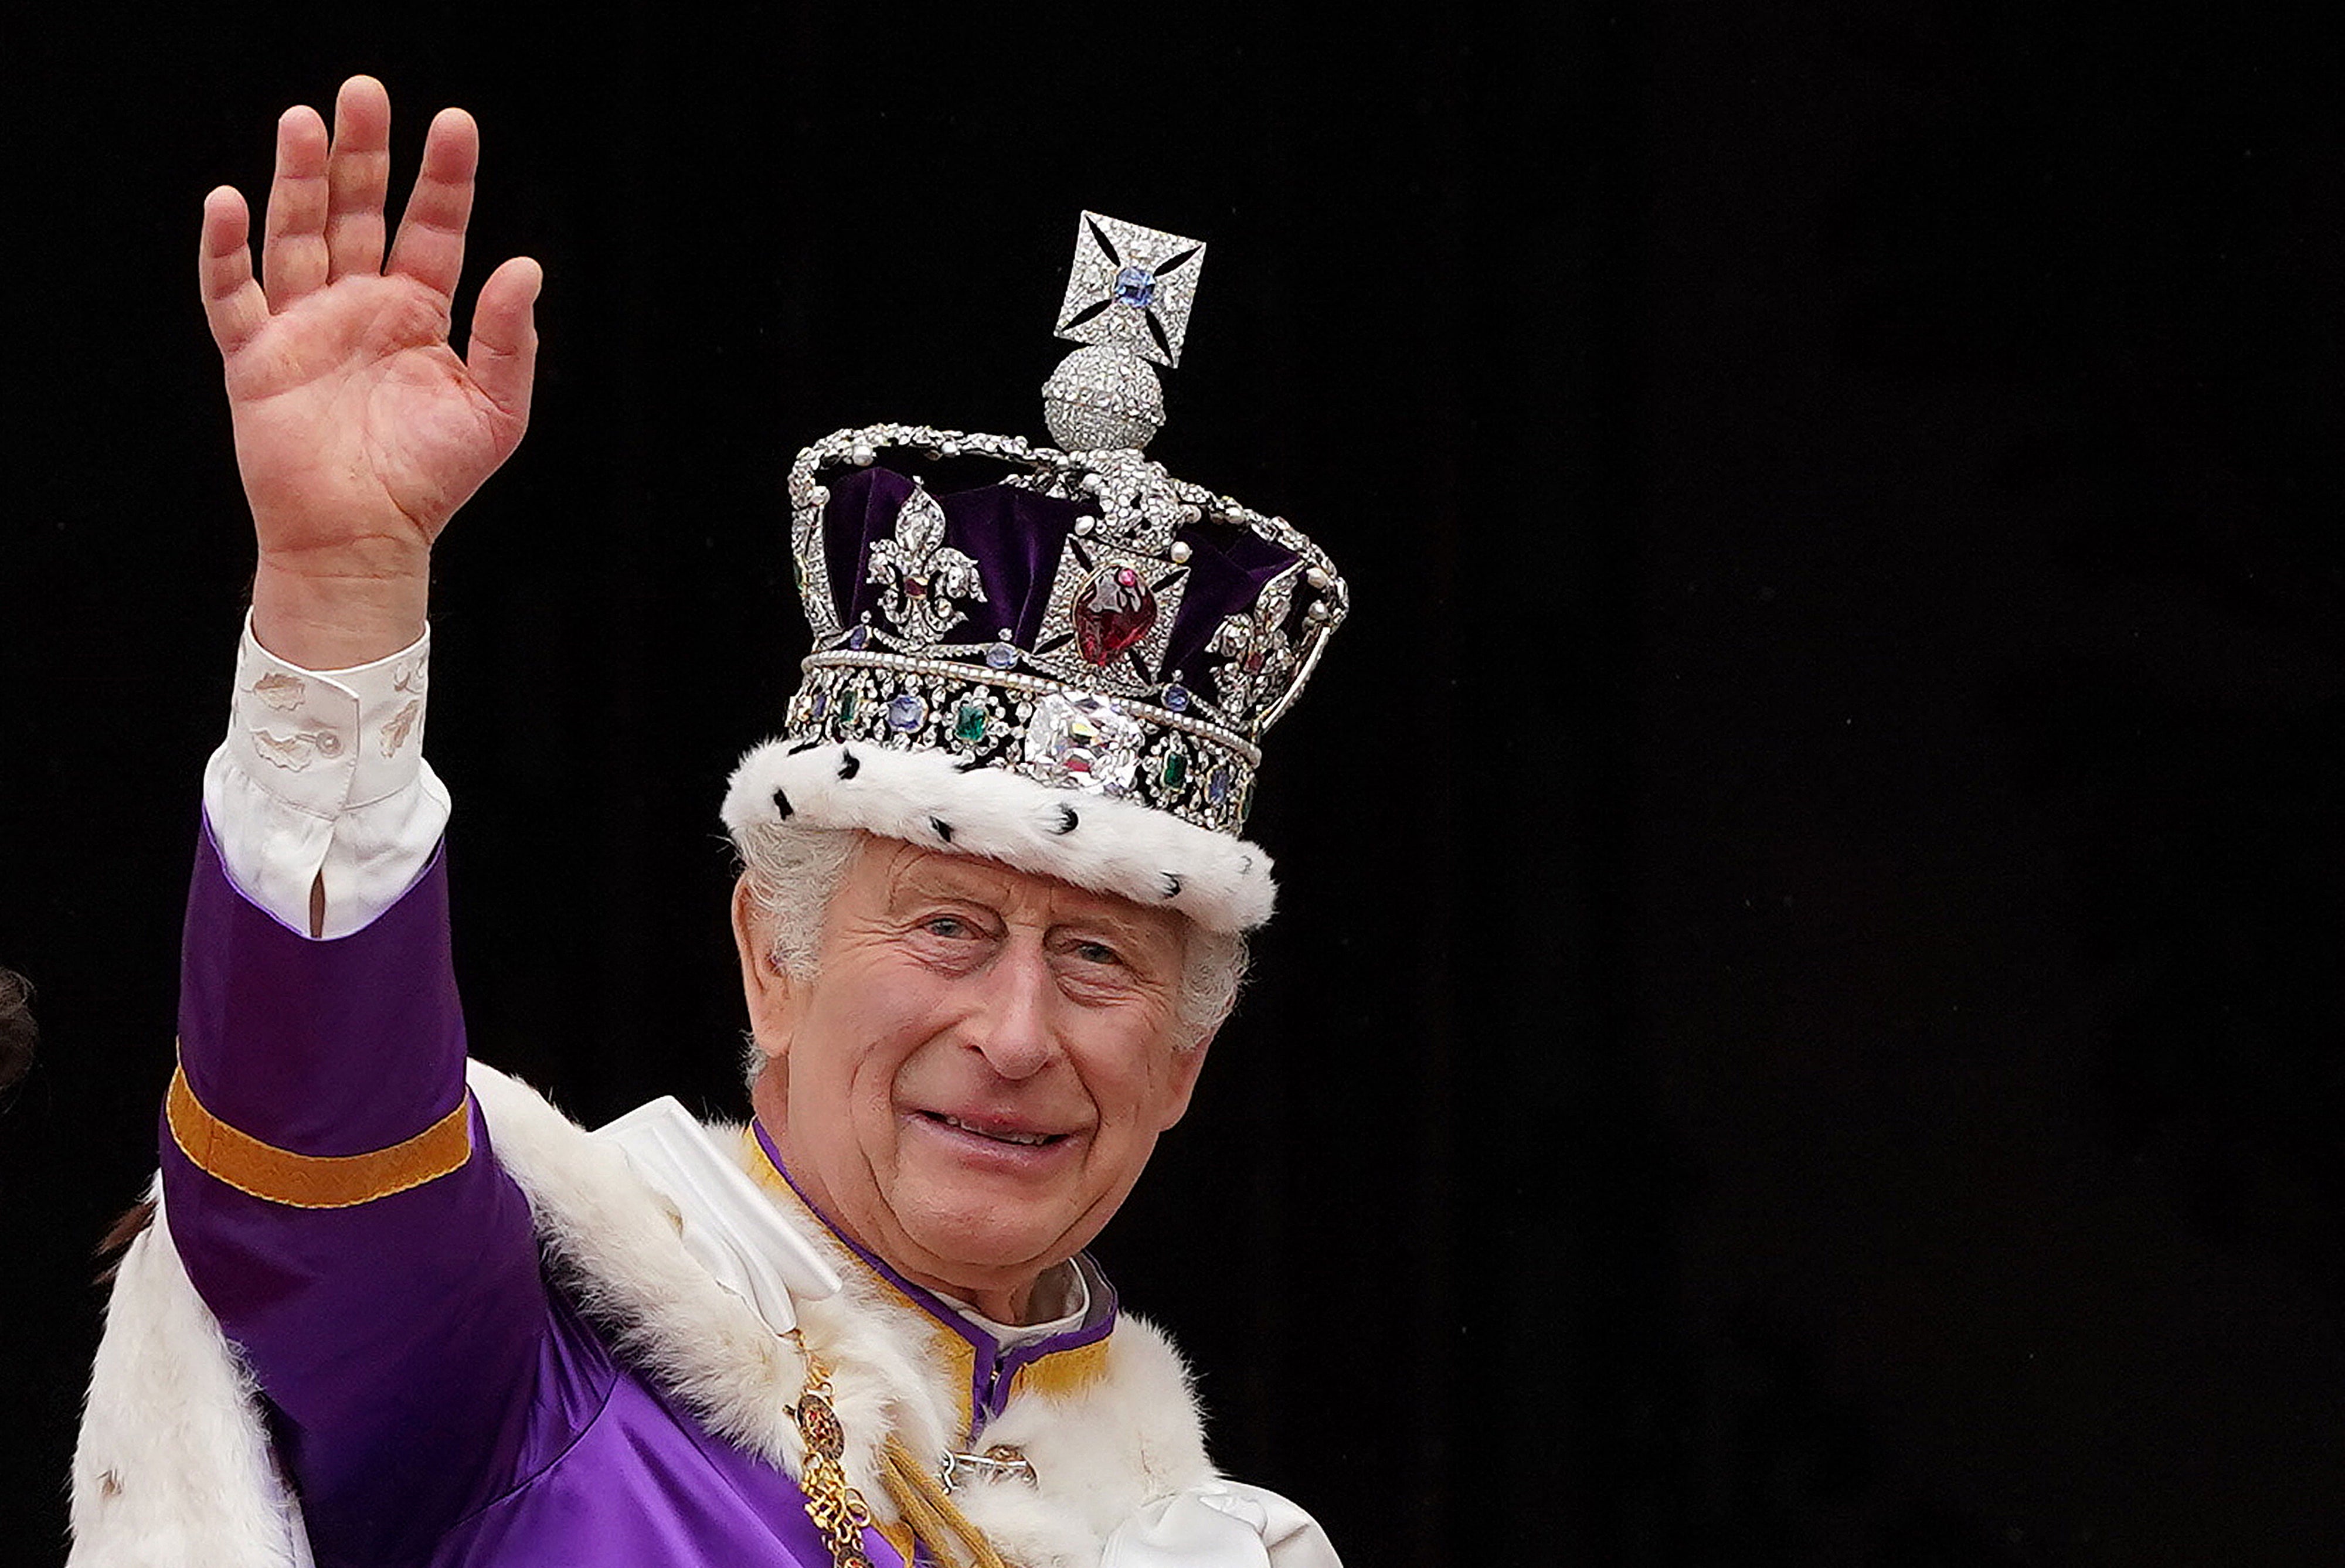 Buckingham Palace on Monday announced that the King is being treated for an undisclosed form of cancer